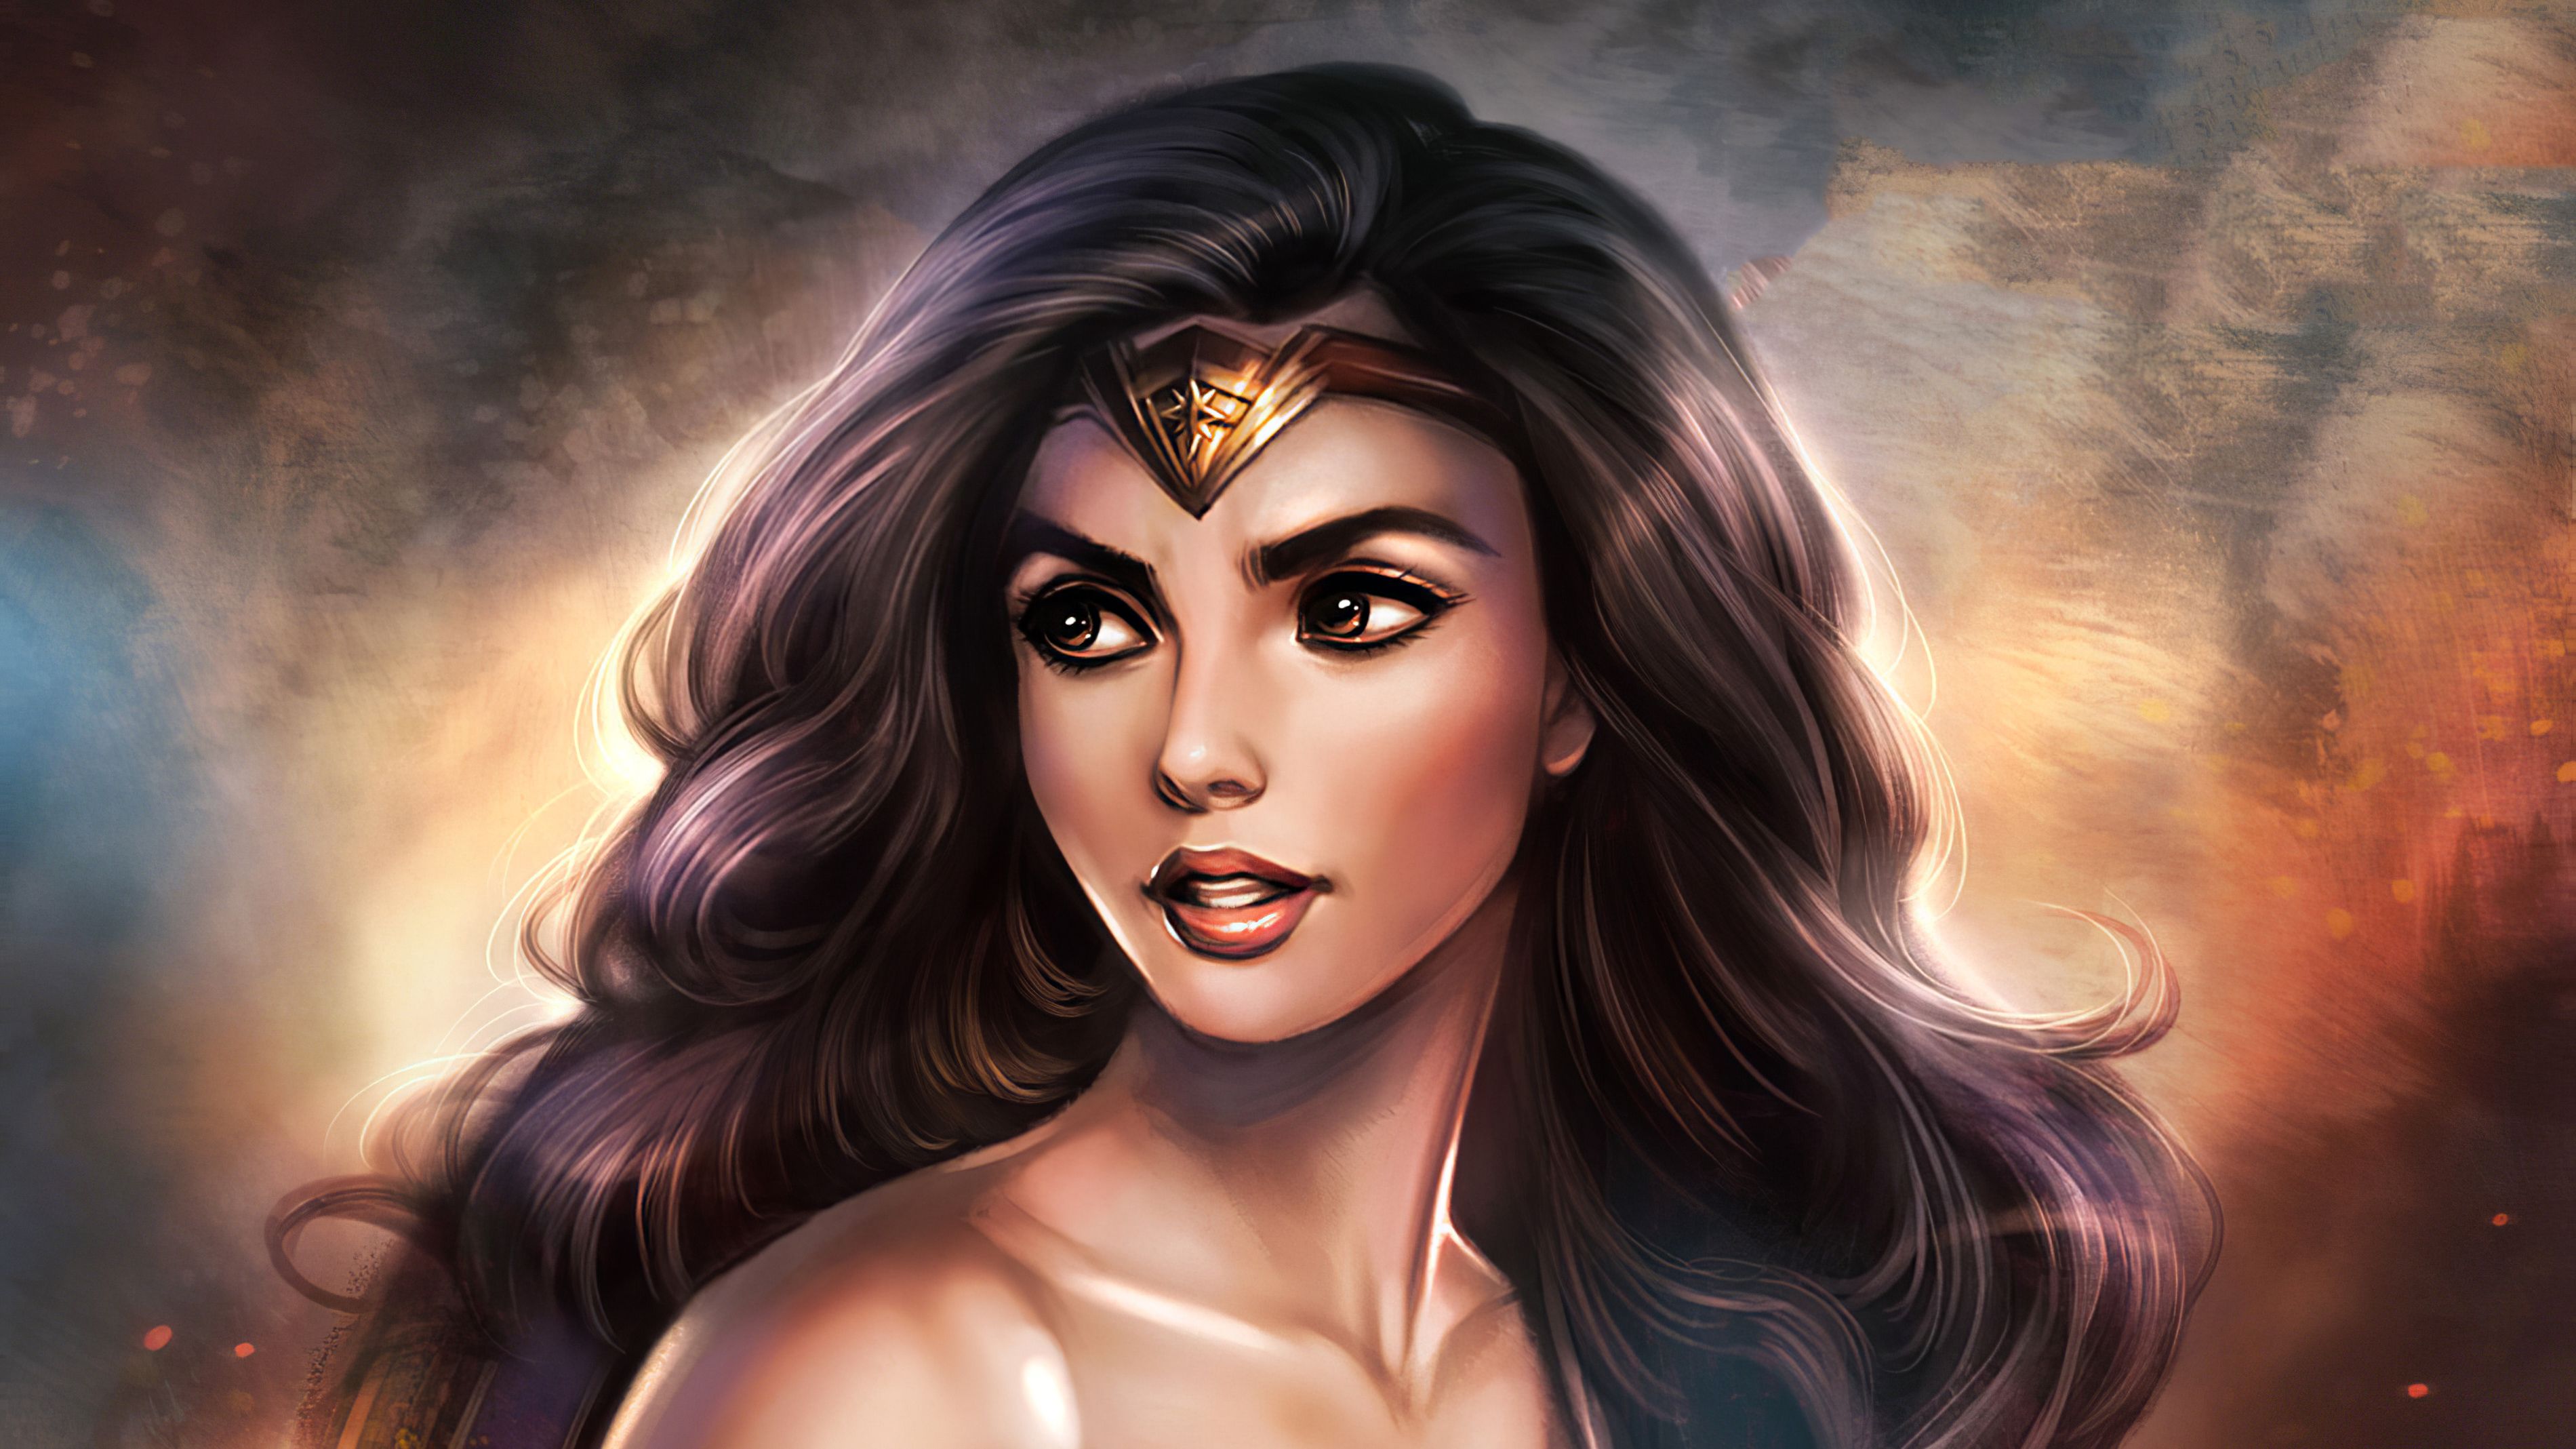 Wonder Woman Cute Artwork, HD Superheroes, 4k Wallpaper, Image, Background, Photo and Picture